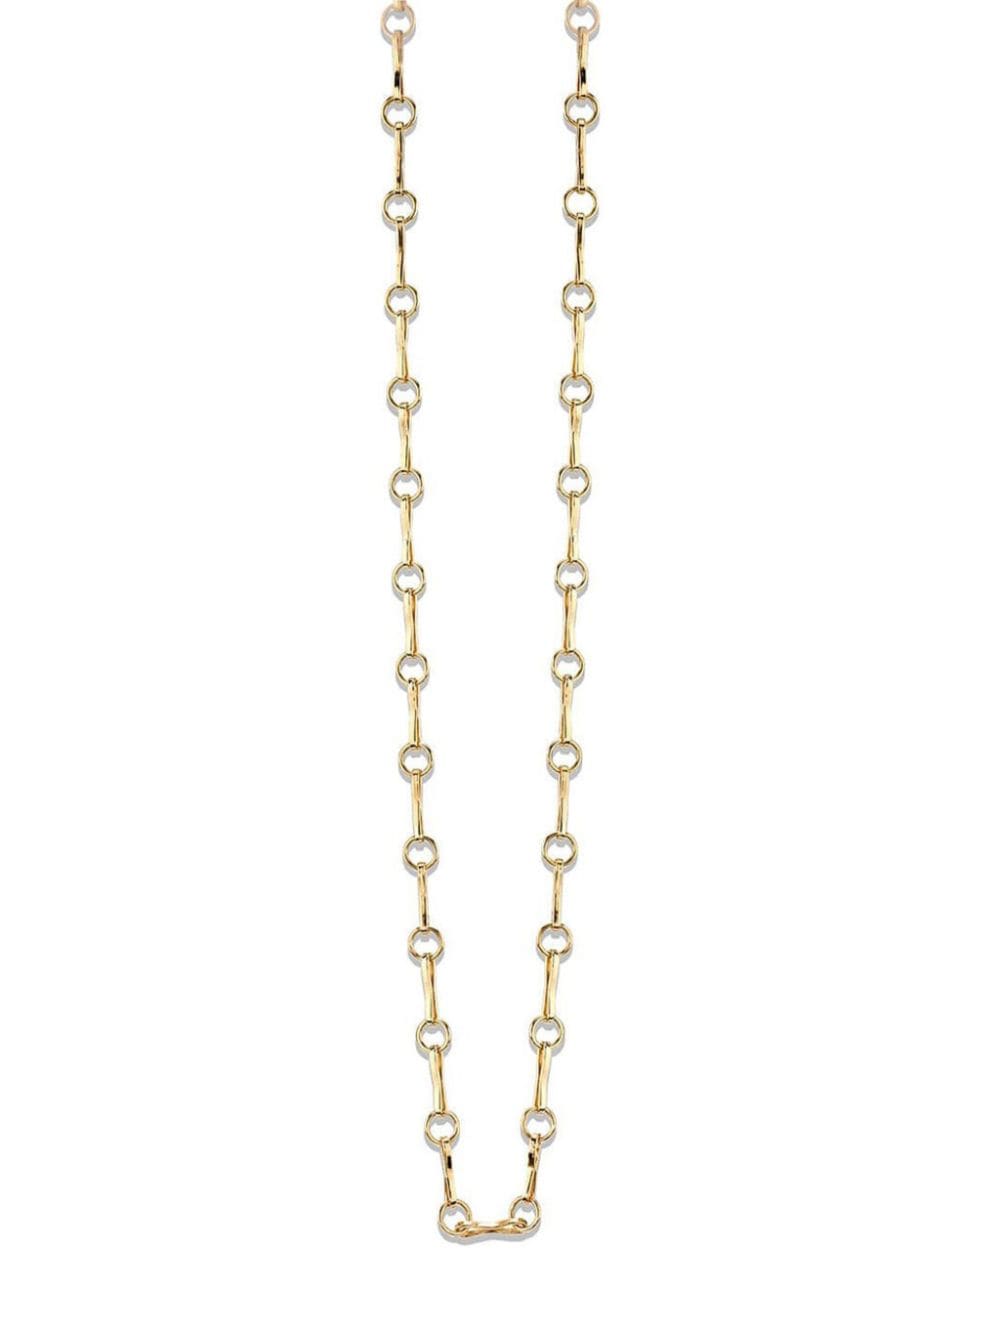 Azlee 18kt Yellow Gold Large Circle Link Chain